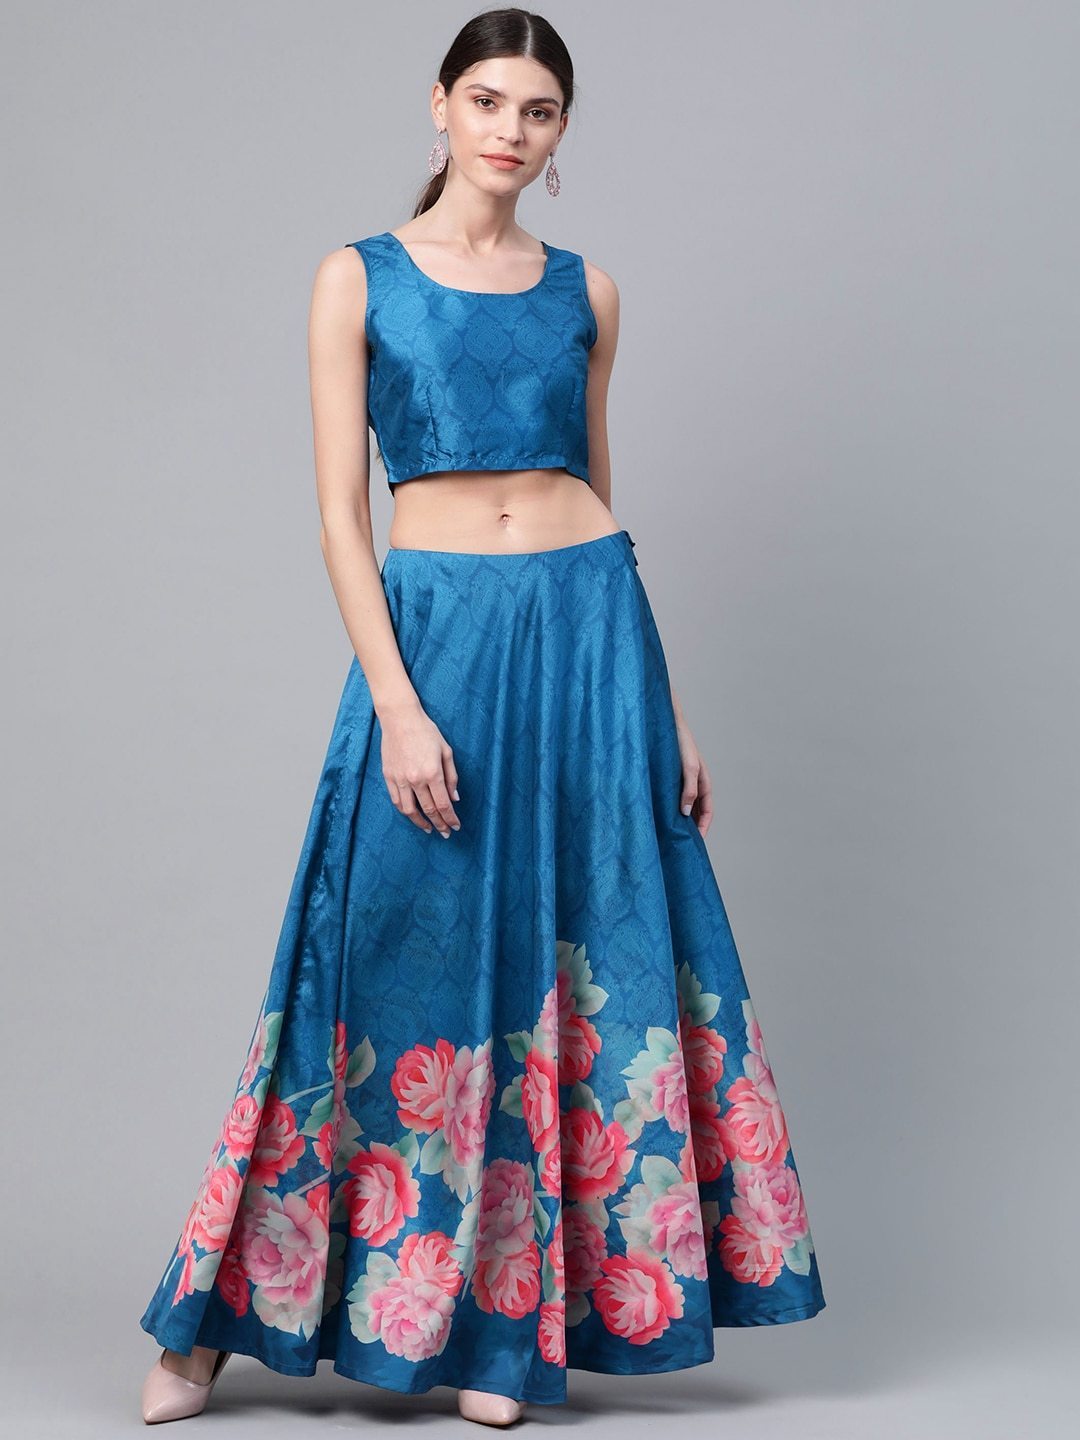 Women's Blue & Pink Floral Print Ready to Wear Lehenga Choli with Ethnic Layer -AKS